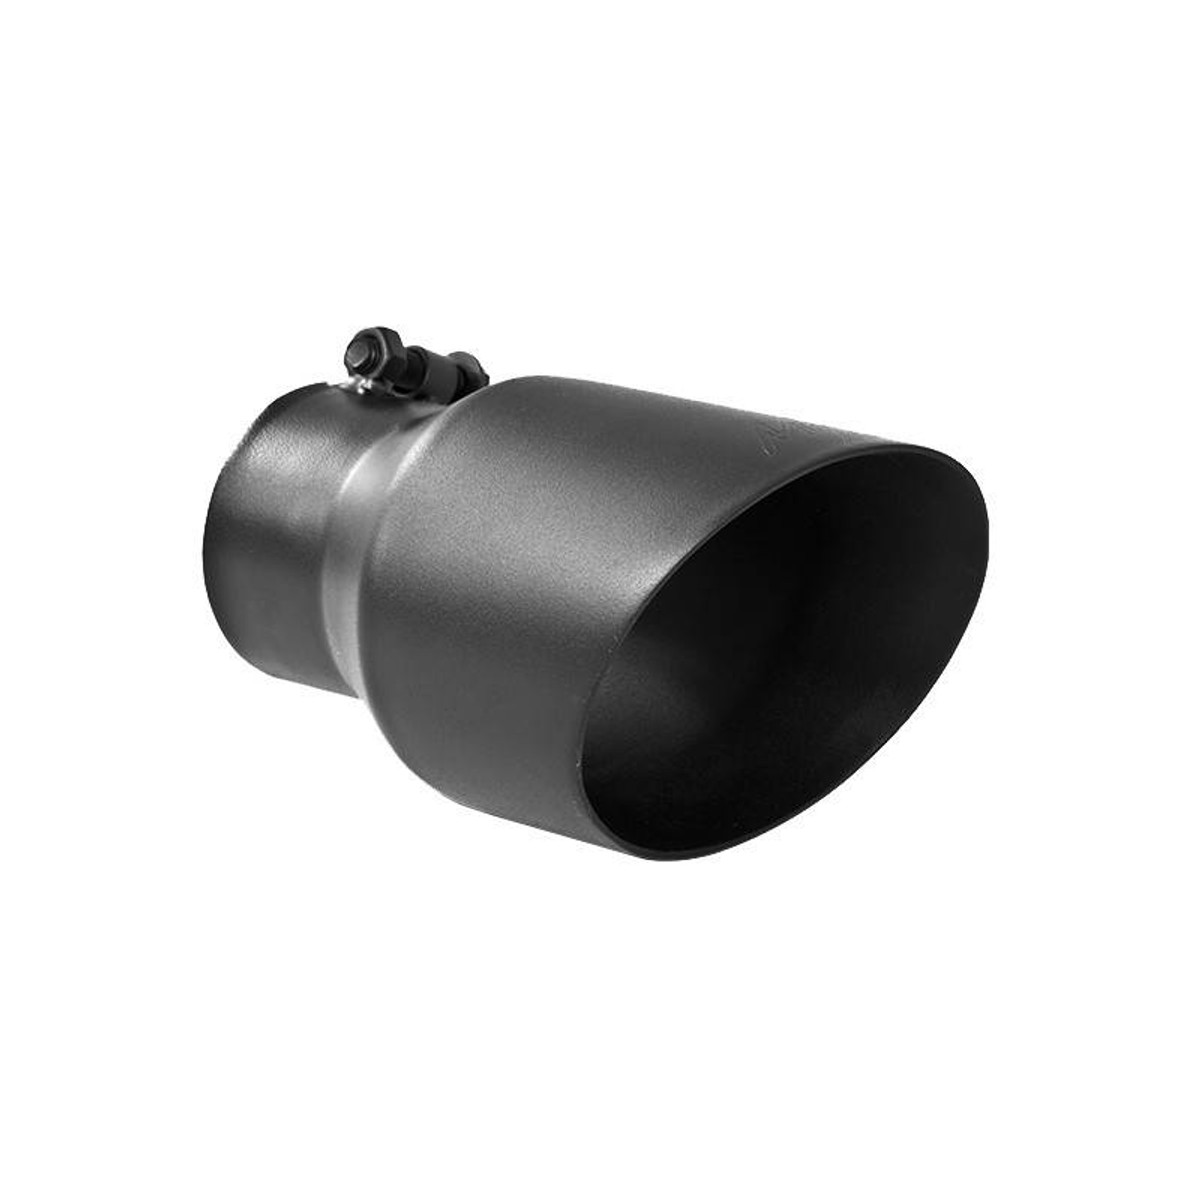 MBRP Black Series - Exhaust Tip - 4.5 Inch O.D. Dual Wall Angled End 3 Inch Inlet 8 Inch Overall Length T5151BLK